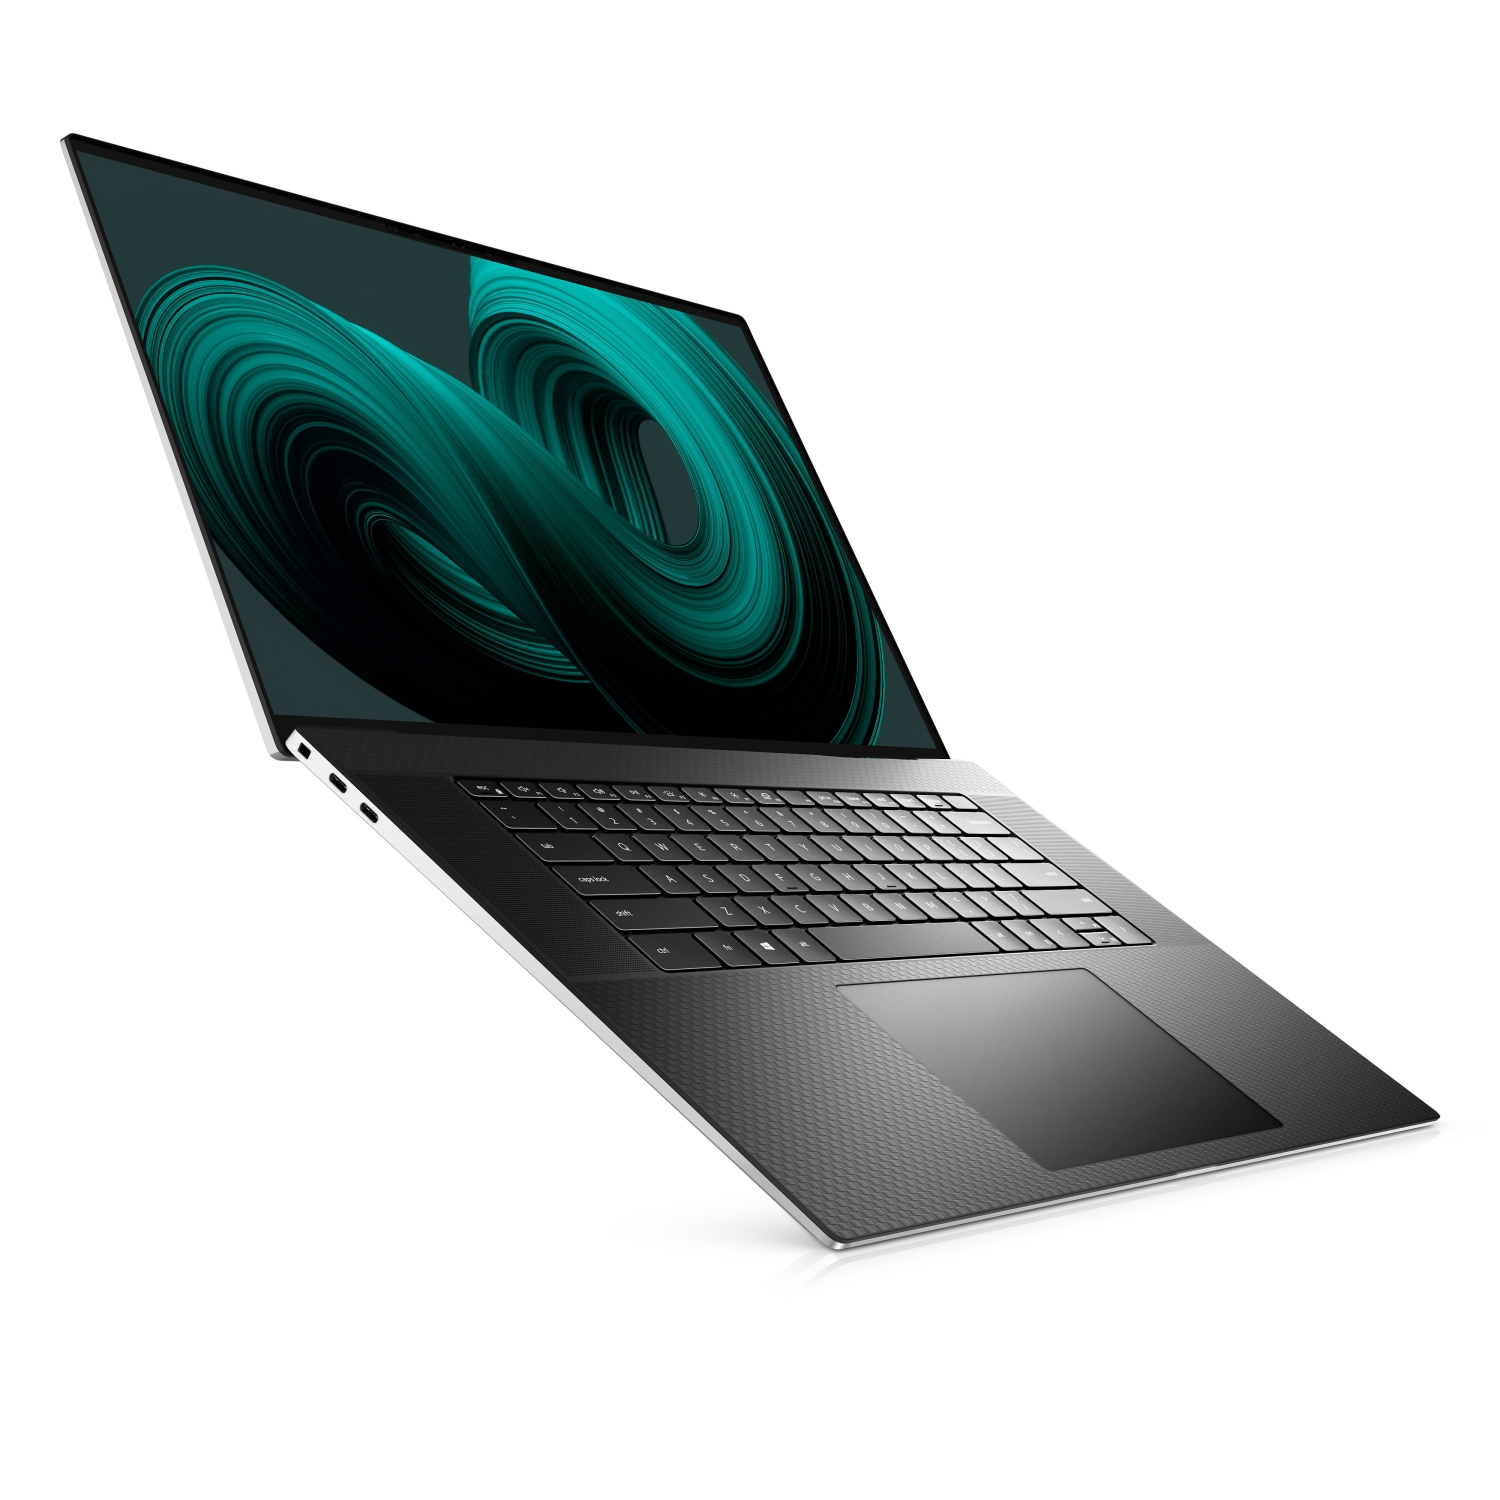 Refurbished (Excellent) - Dell XPS 17 9710 Laptop (2021) | 17" FHD+ | Core i7 - 512GB SSD - 16GB RAM - RTX 3060 | 8 Cores @ 4.6 GHz - 11th Gen CPU Certified Refurbished